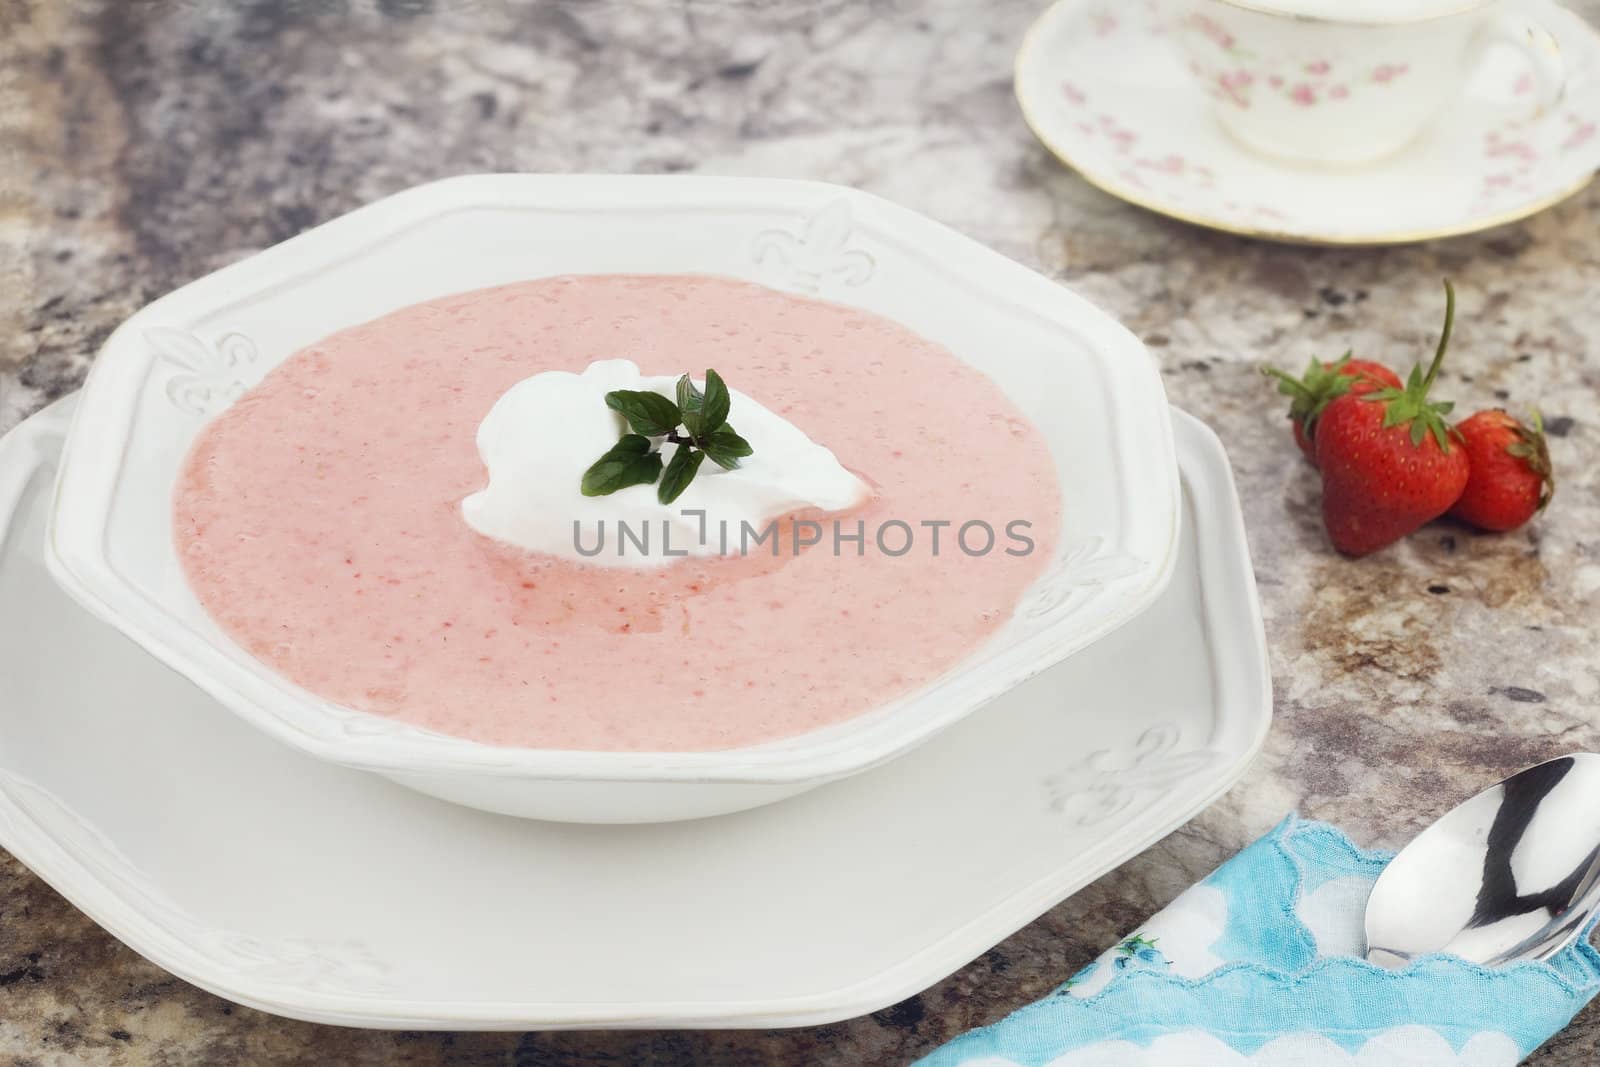 A bowl of chilled strawberry soup, garnished with a dollop of whipped cream and a fresh sprig of chocolate mint.

